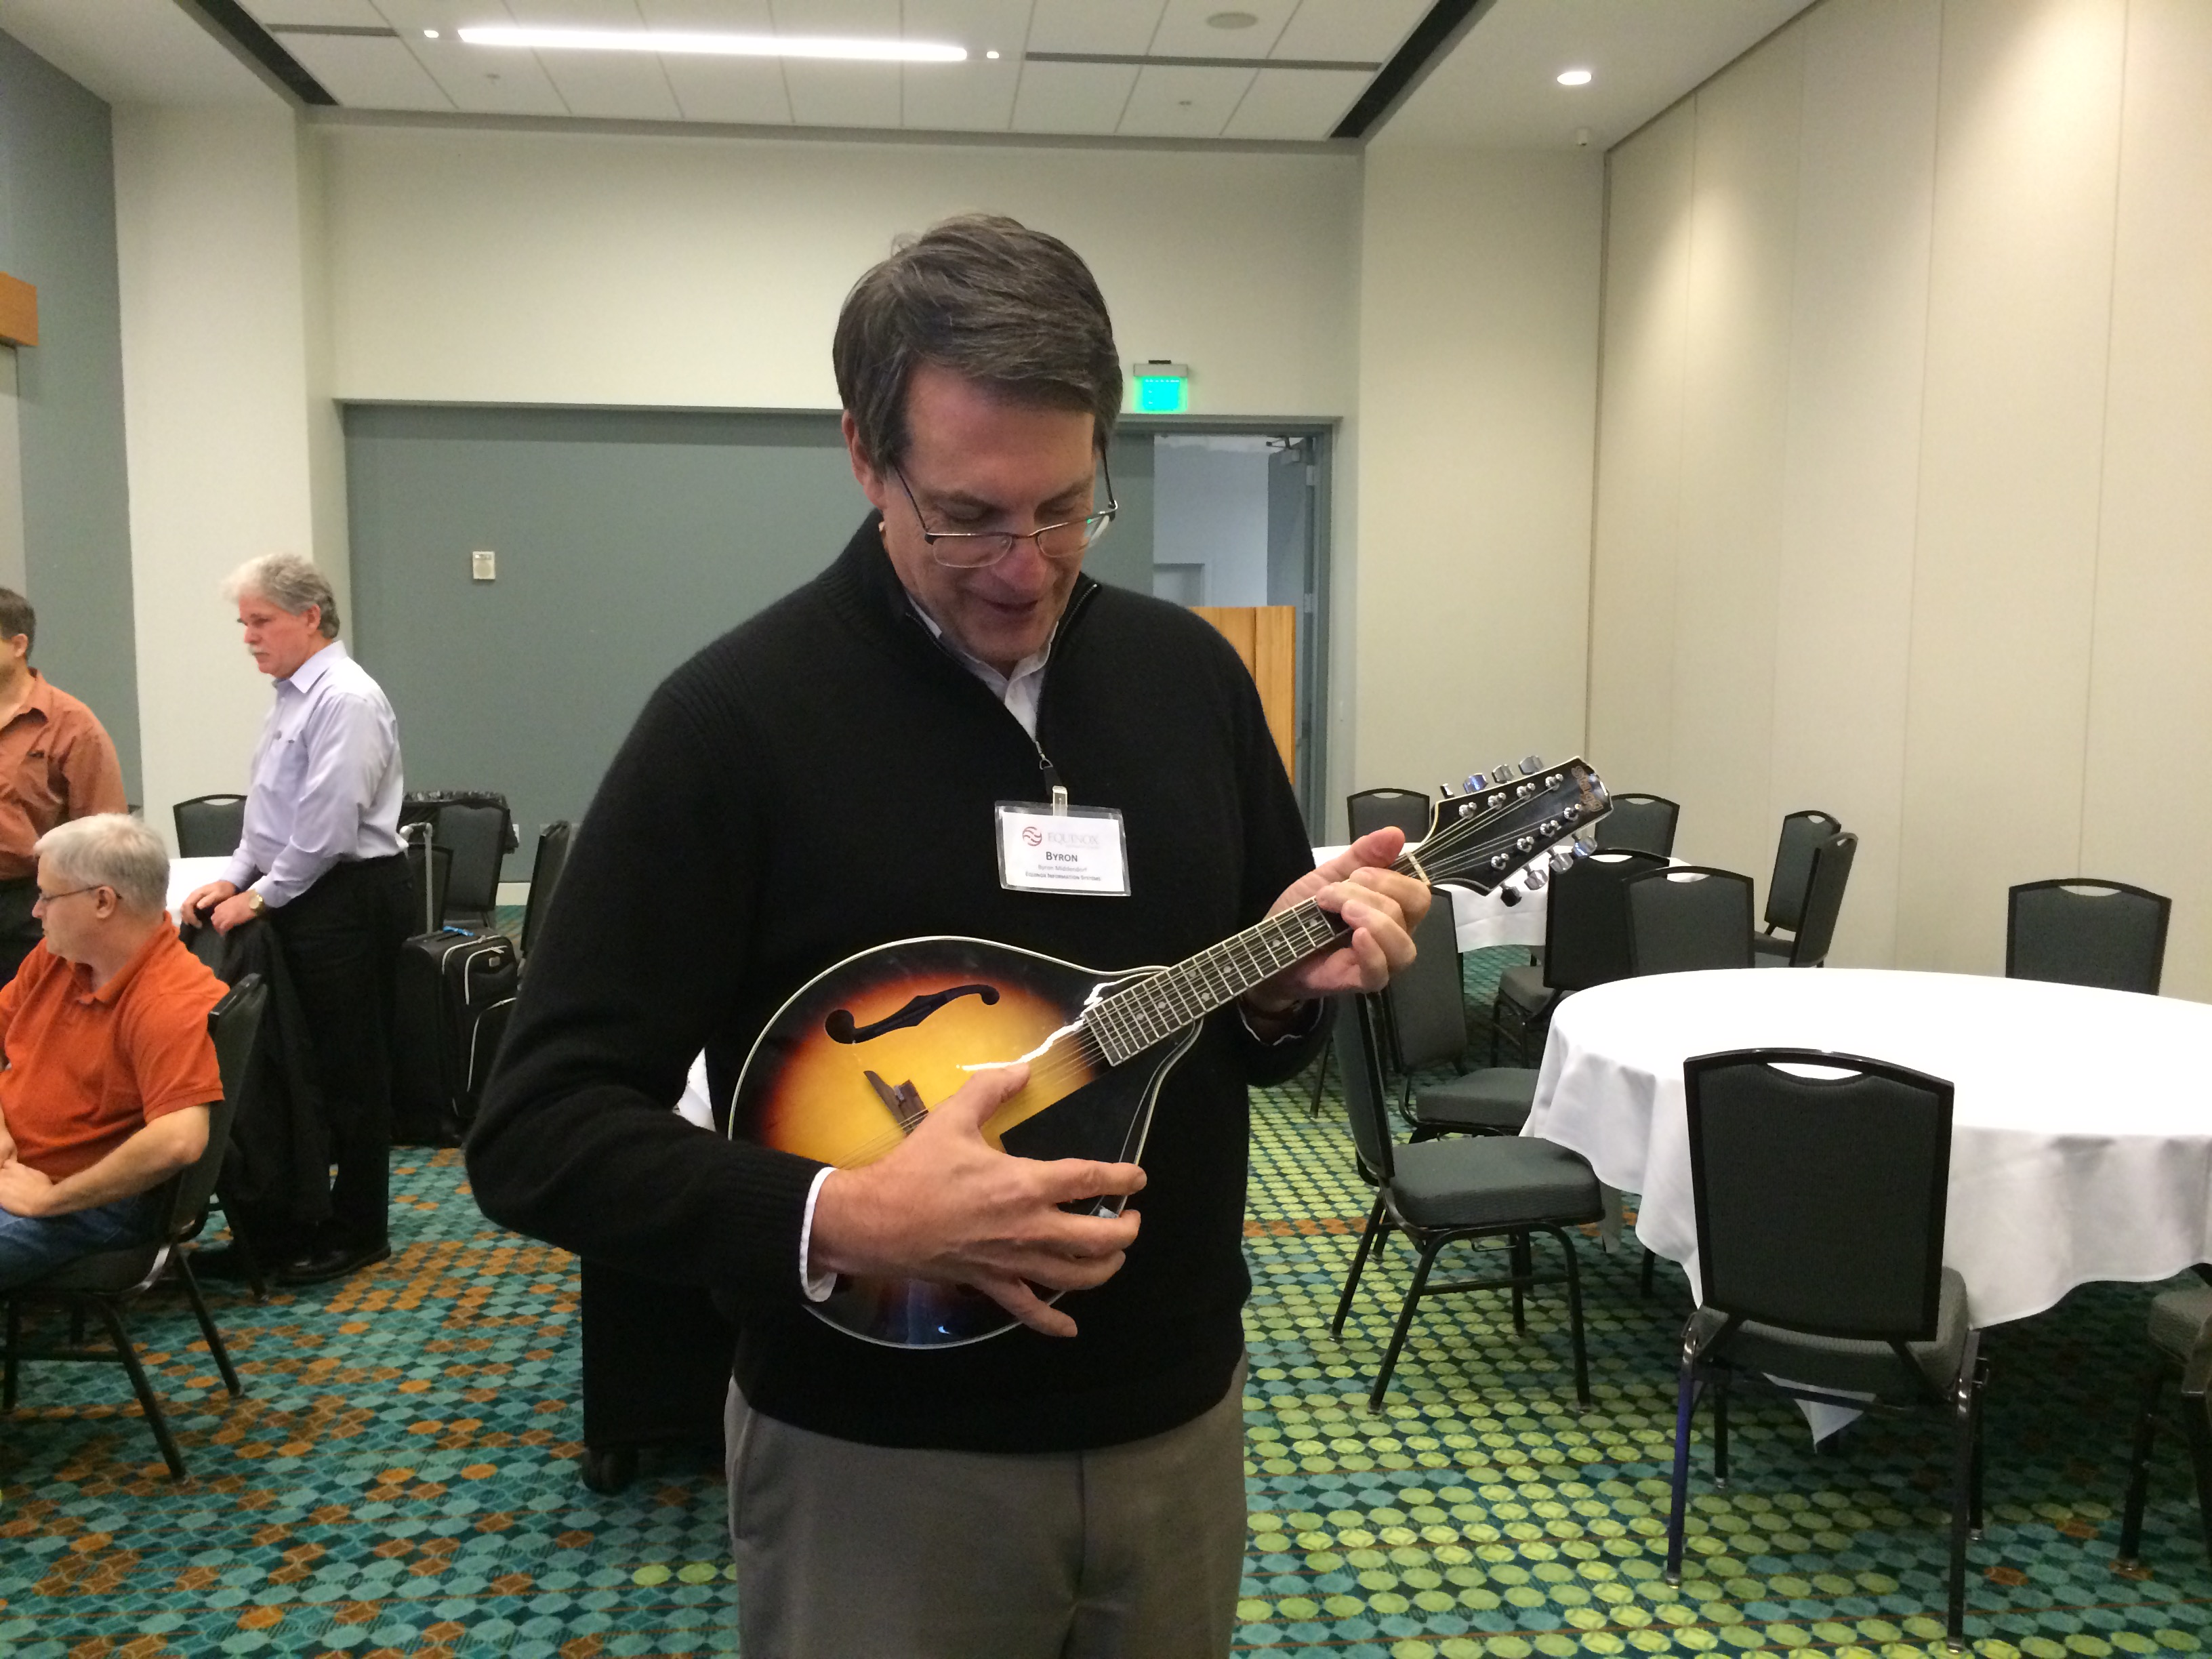 Our fearless leader strums a tune as the event winds to a close.